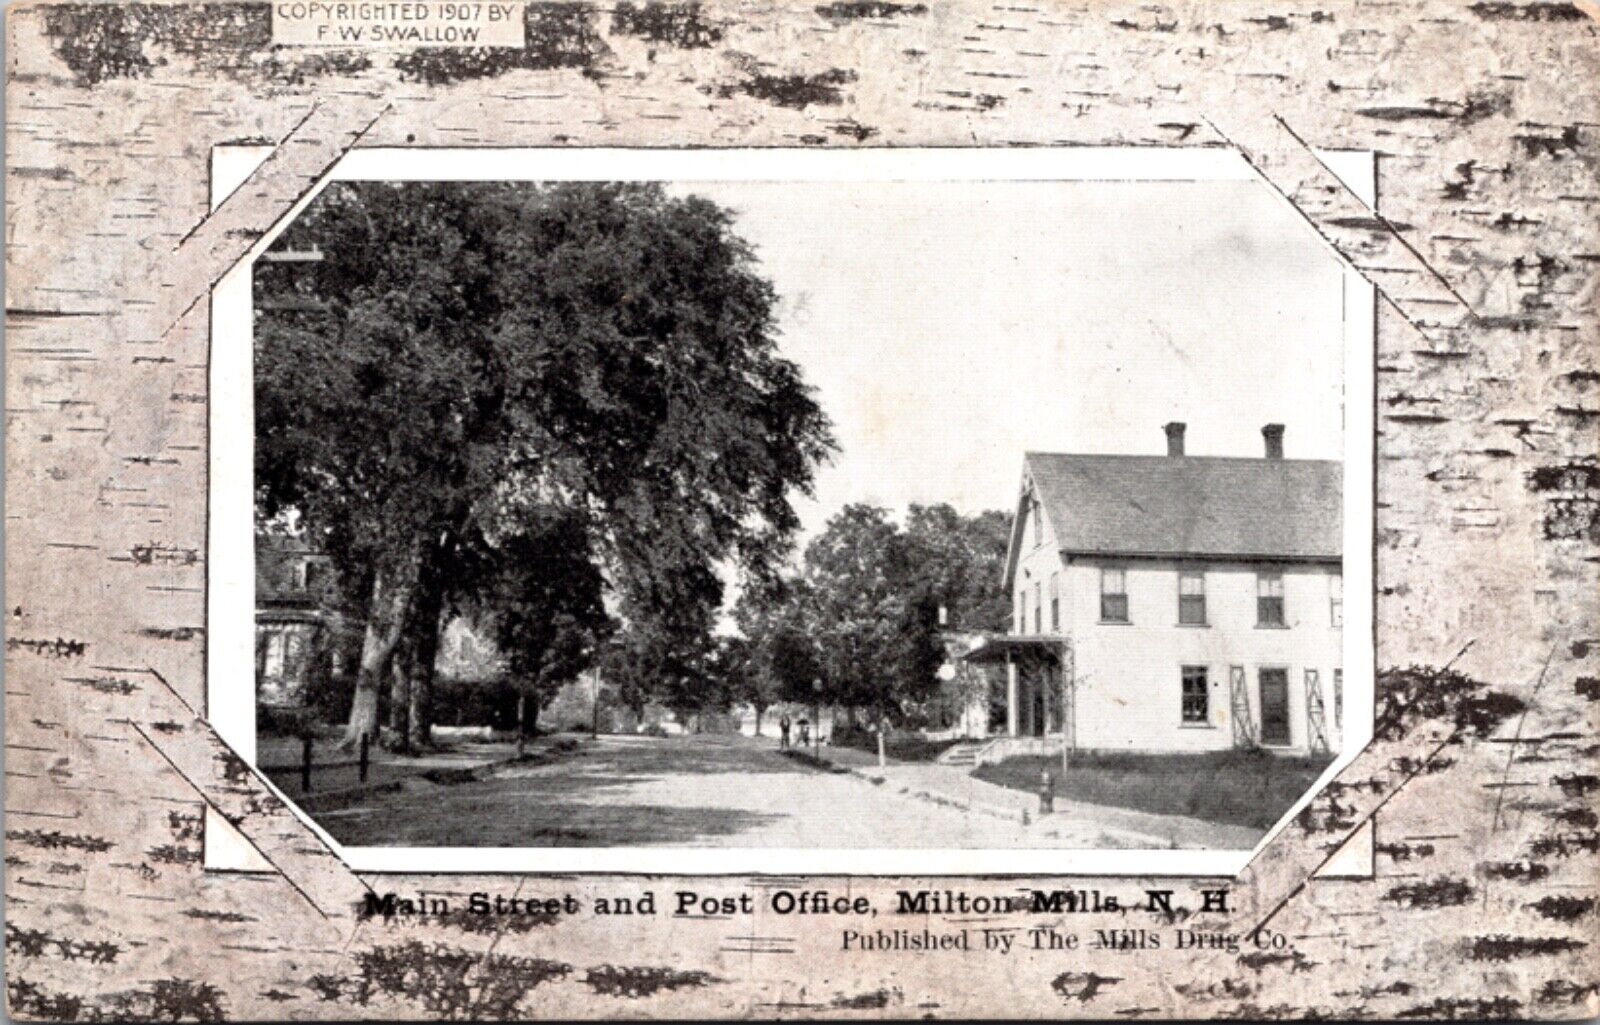 Postcard Main Street and Post Office in Milton Mills, New Hampshire